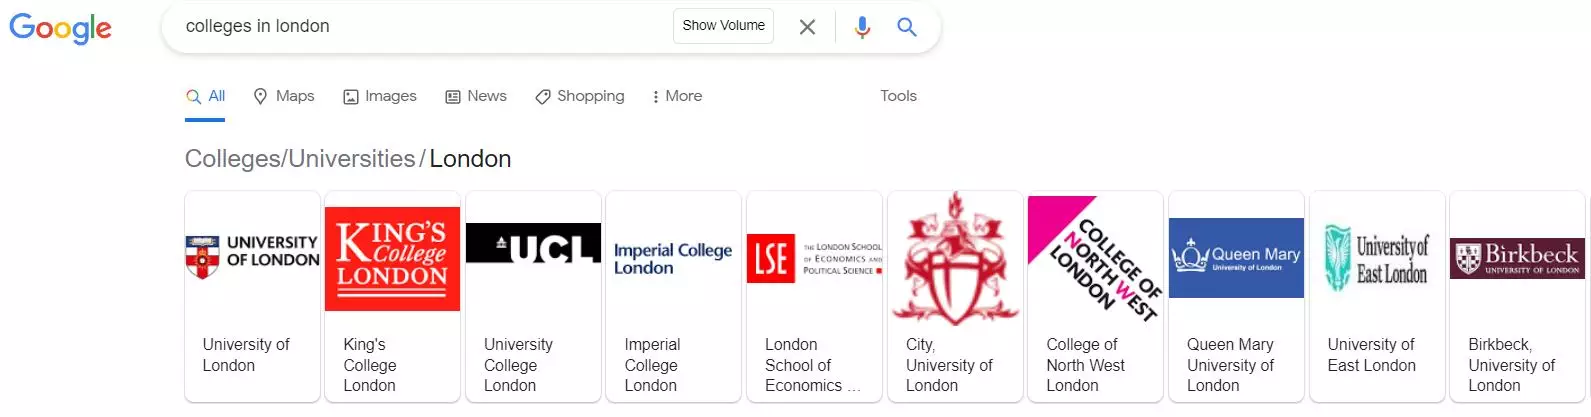 Example of Google search to show local service ads for colleges in london